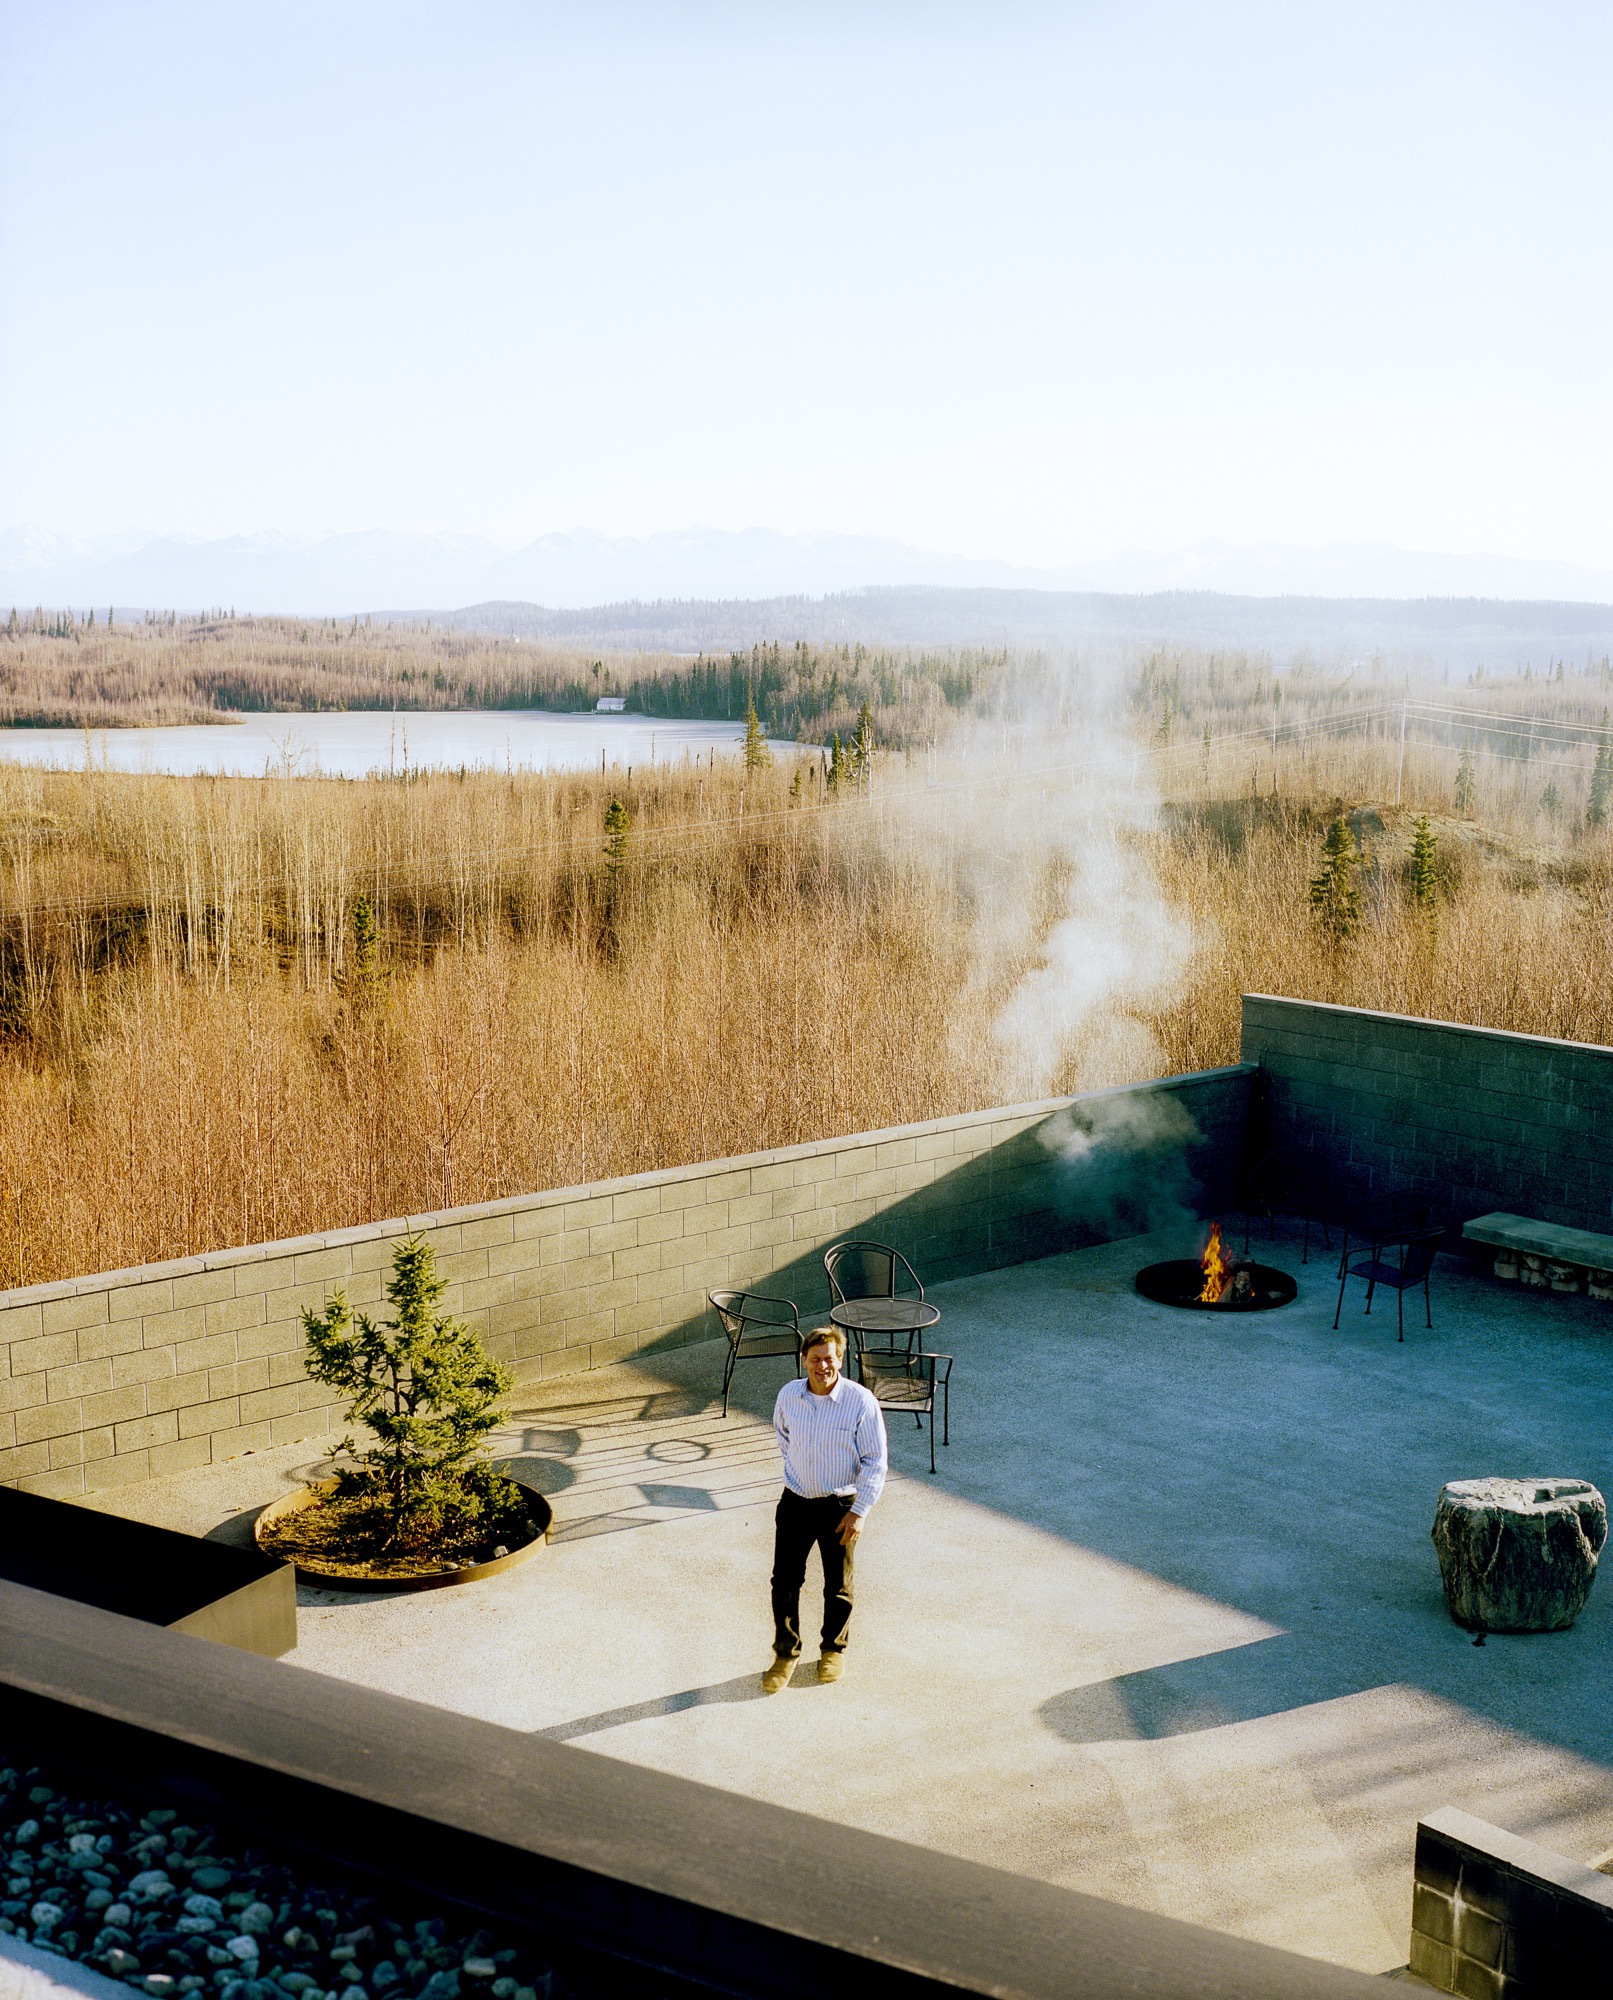 The courtyard with its fire pit and infinity pond—extends the living area outdoors. The family has hosted events, weddings, and even a funeral here, and annual solstice parties are always a big hit with the neighbors / Photo by Kamil Bialous